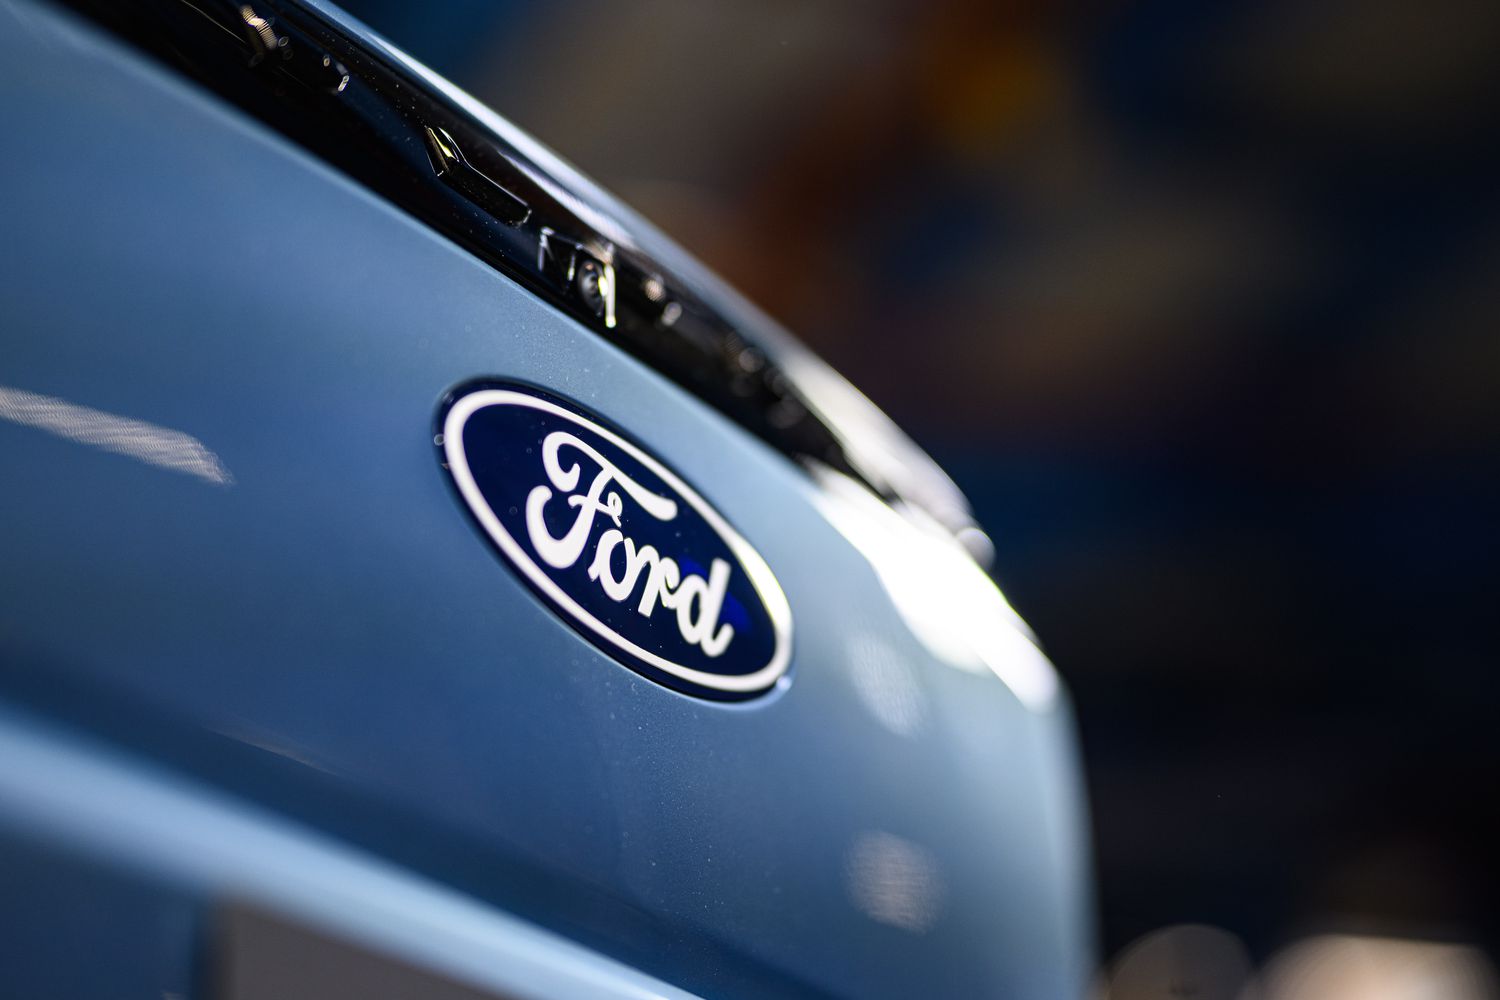 Ford Offers Increased Wages At Planned EV Battery Factories Amid UAW Strike